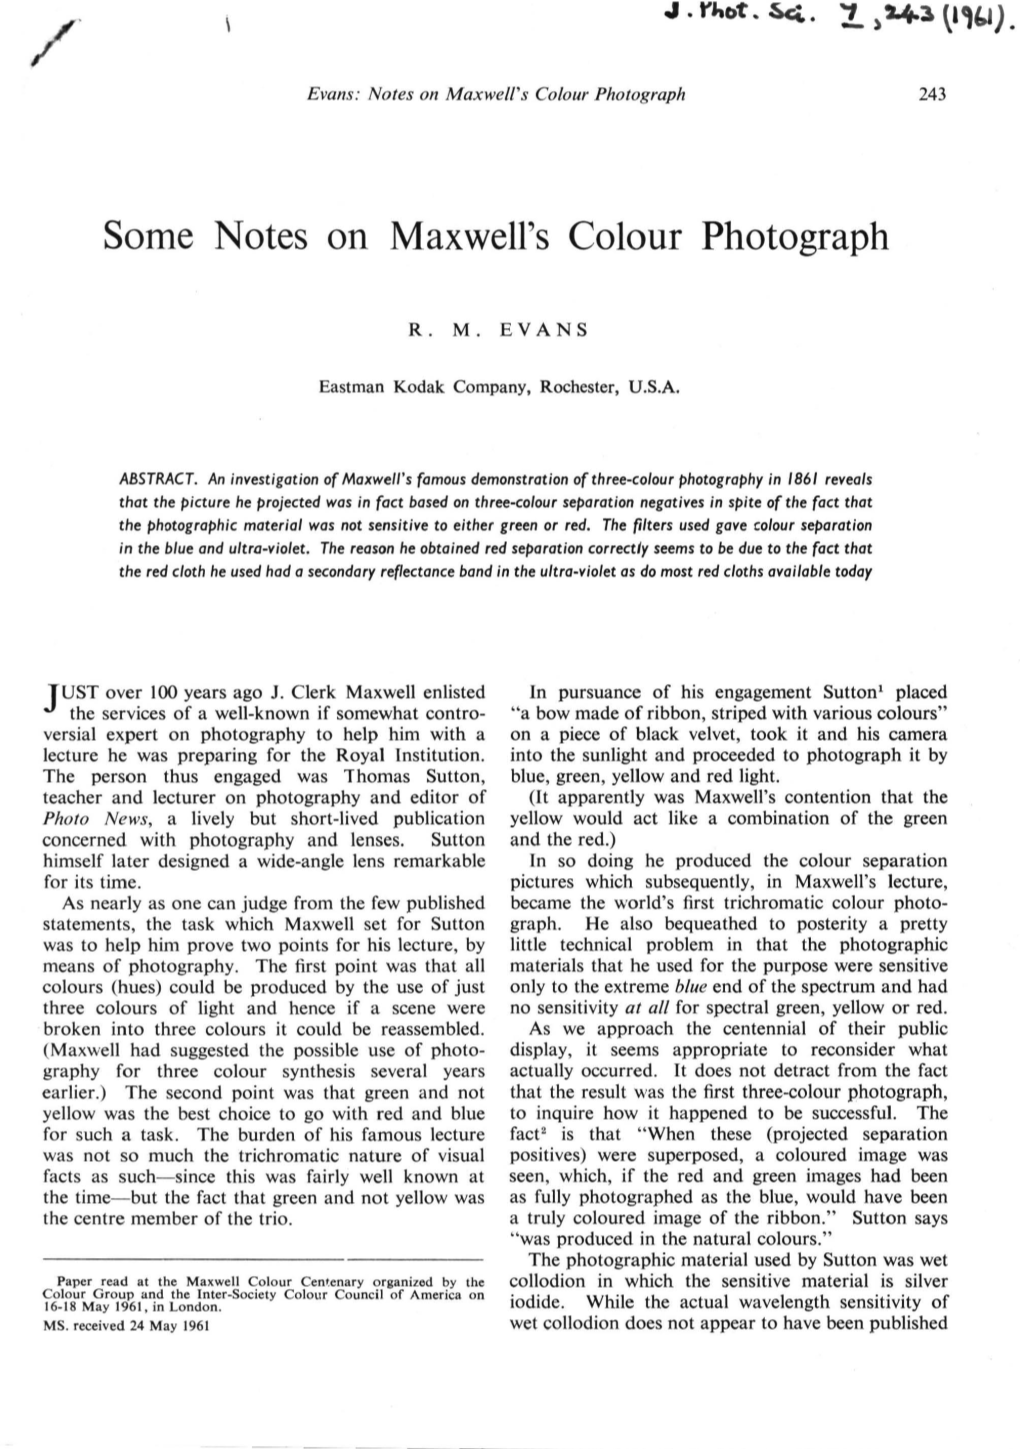 Some Notes on Maxwell's Colour Photograph